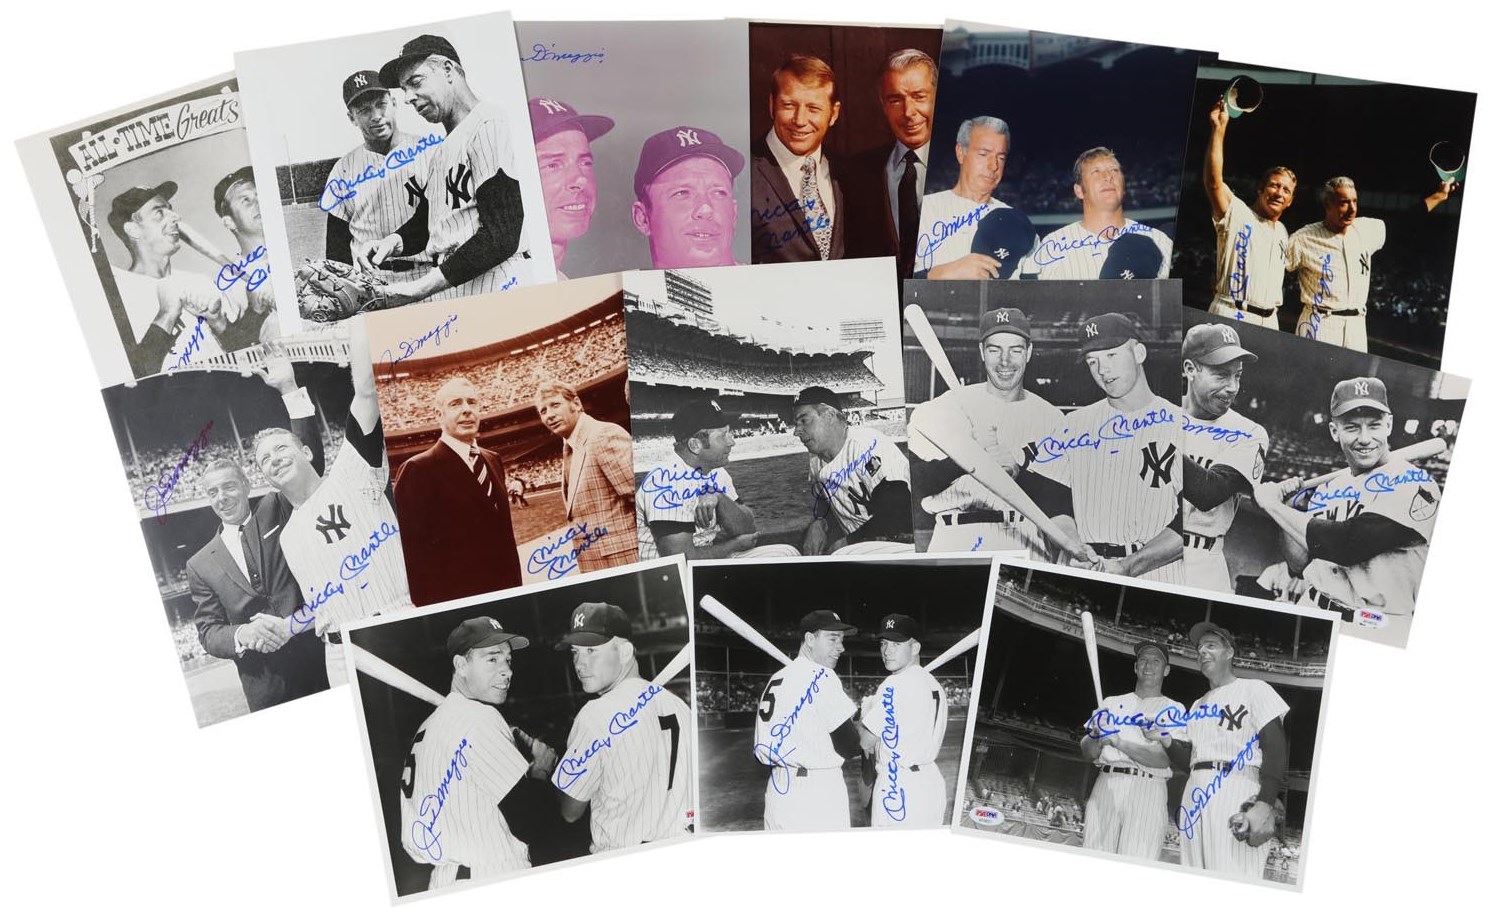 Mickey Mantle & Joe DiMaggio Dual-Signed Photographs - All PSA Certified (14)